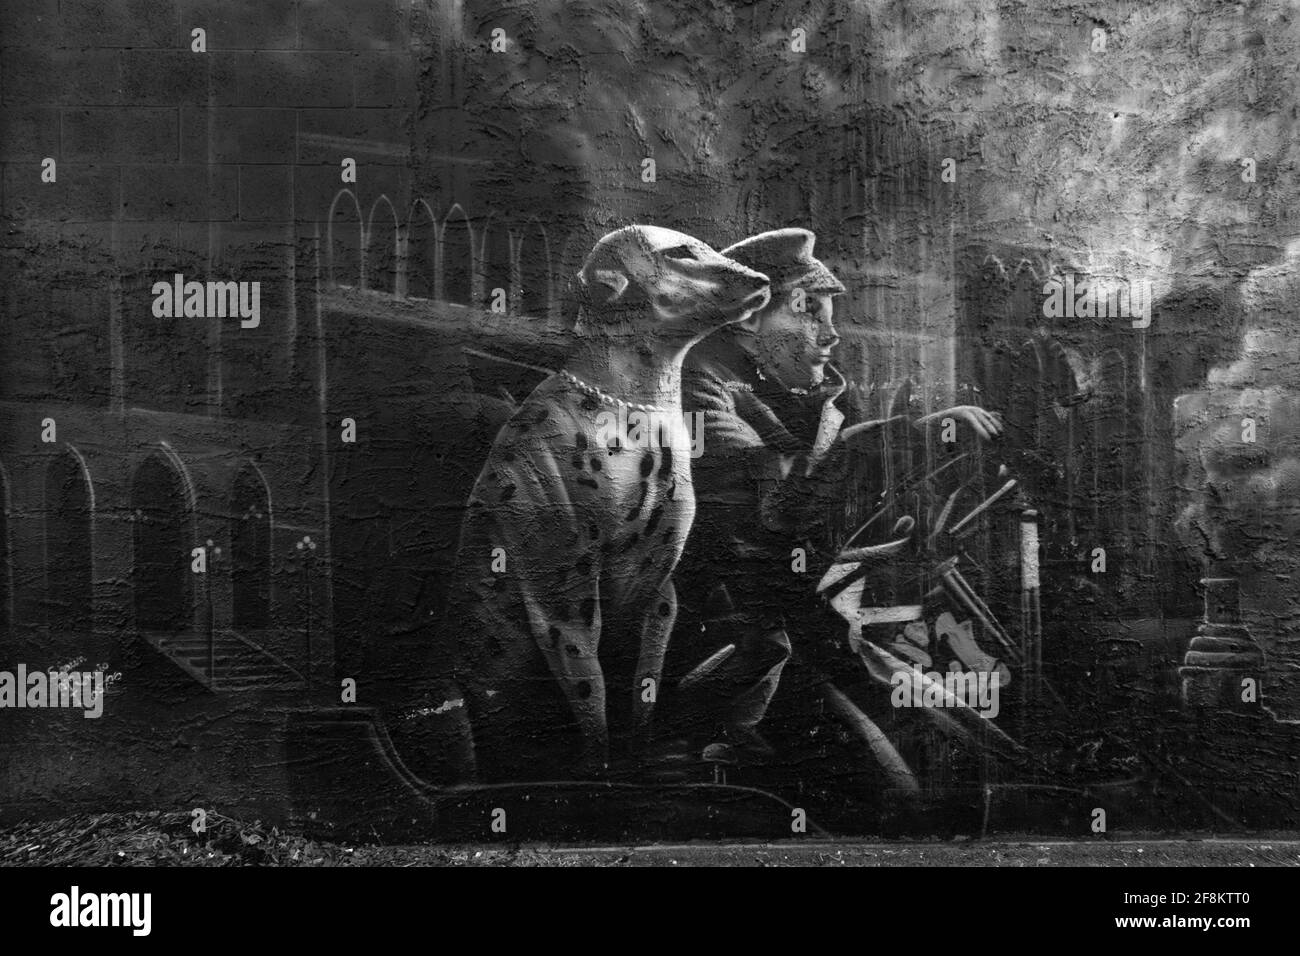 Ottawa Firefighters Mural. Black and white painting of old fashioned fireman and a Dalmatian dog. Stock Photo